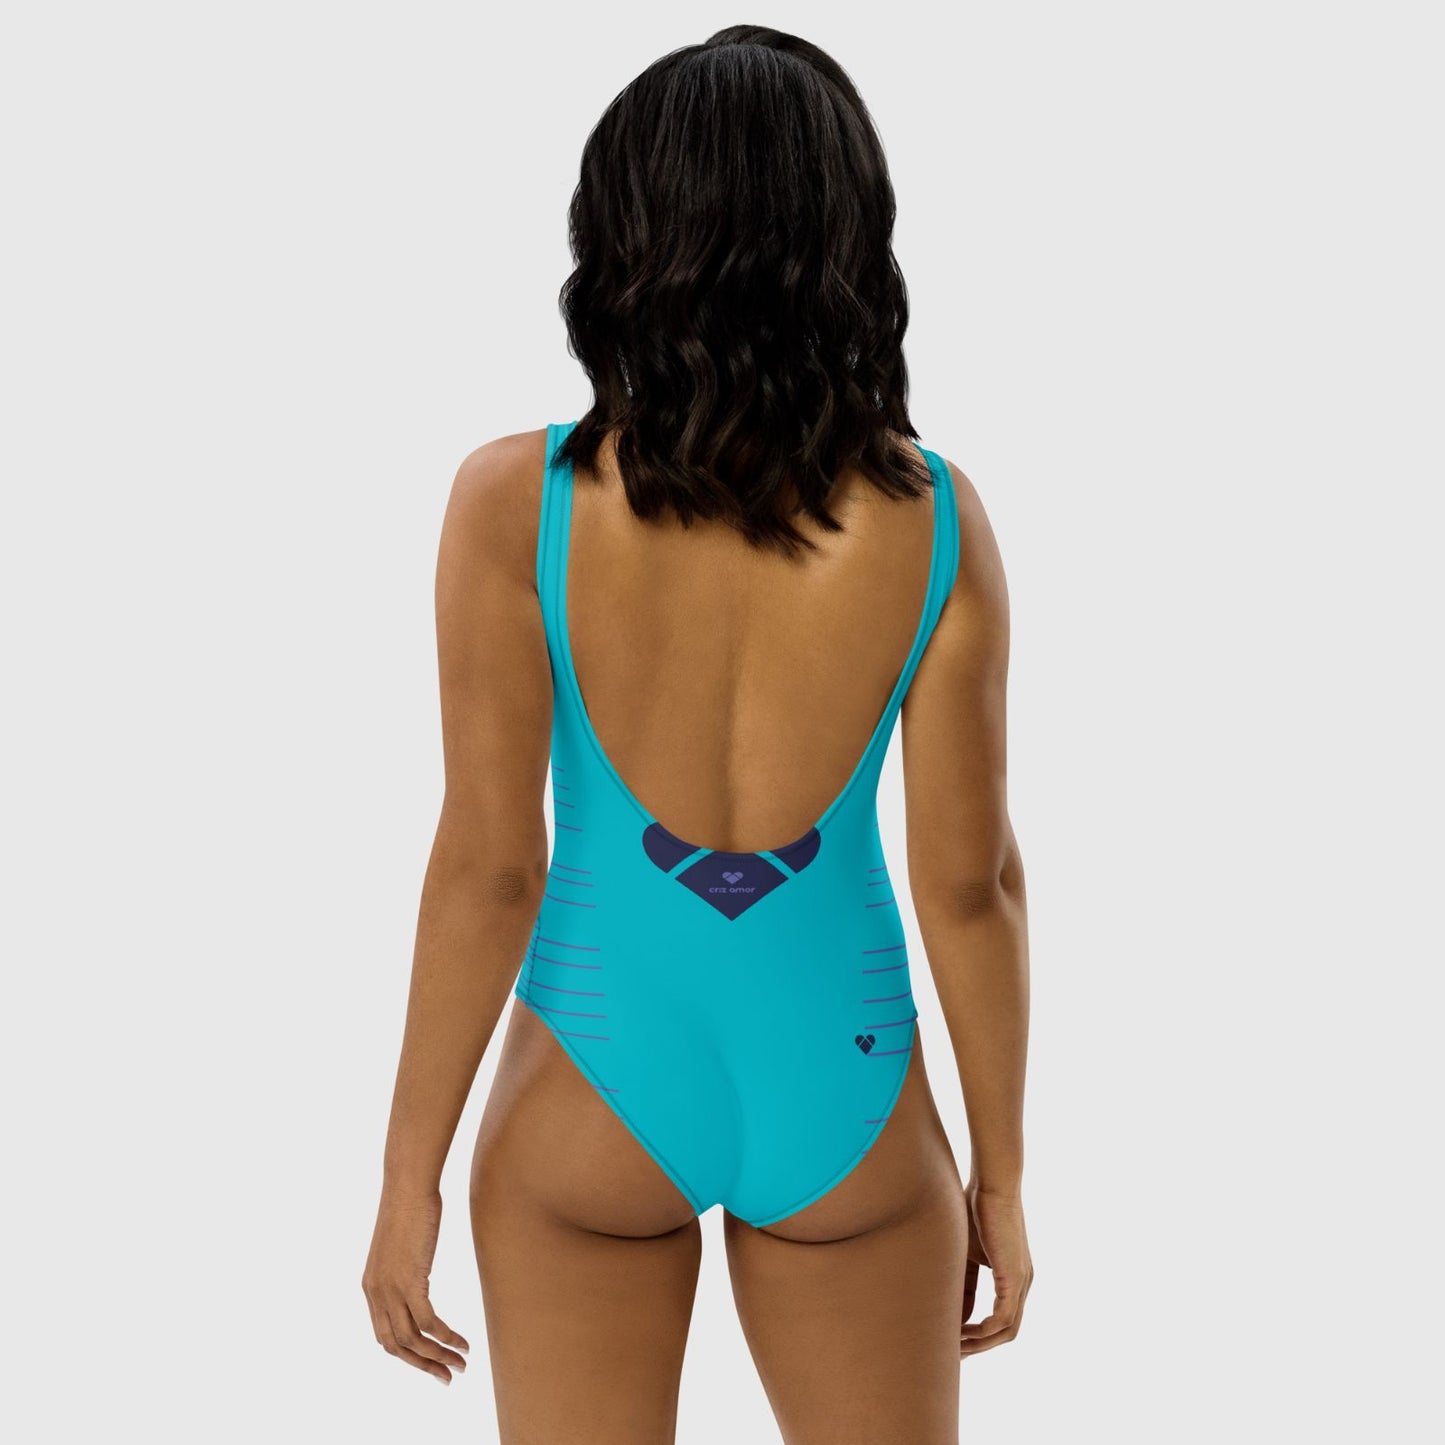 Stylish Women's Beach Apparel: Dual Swimsuit in Turquoise